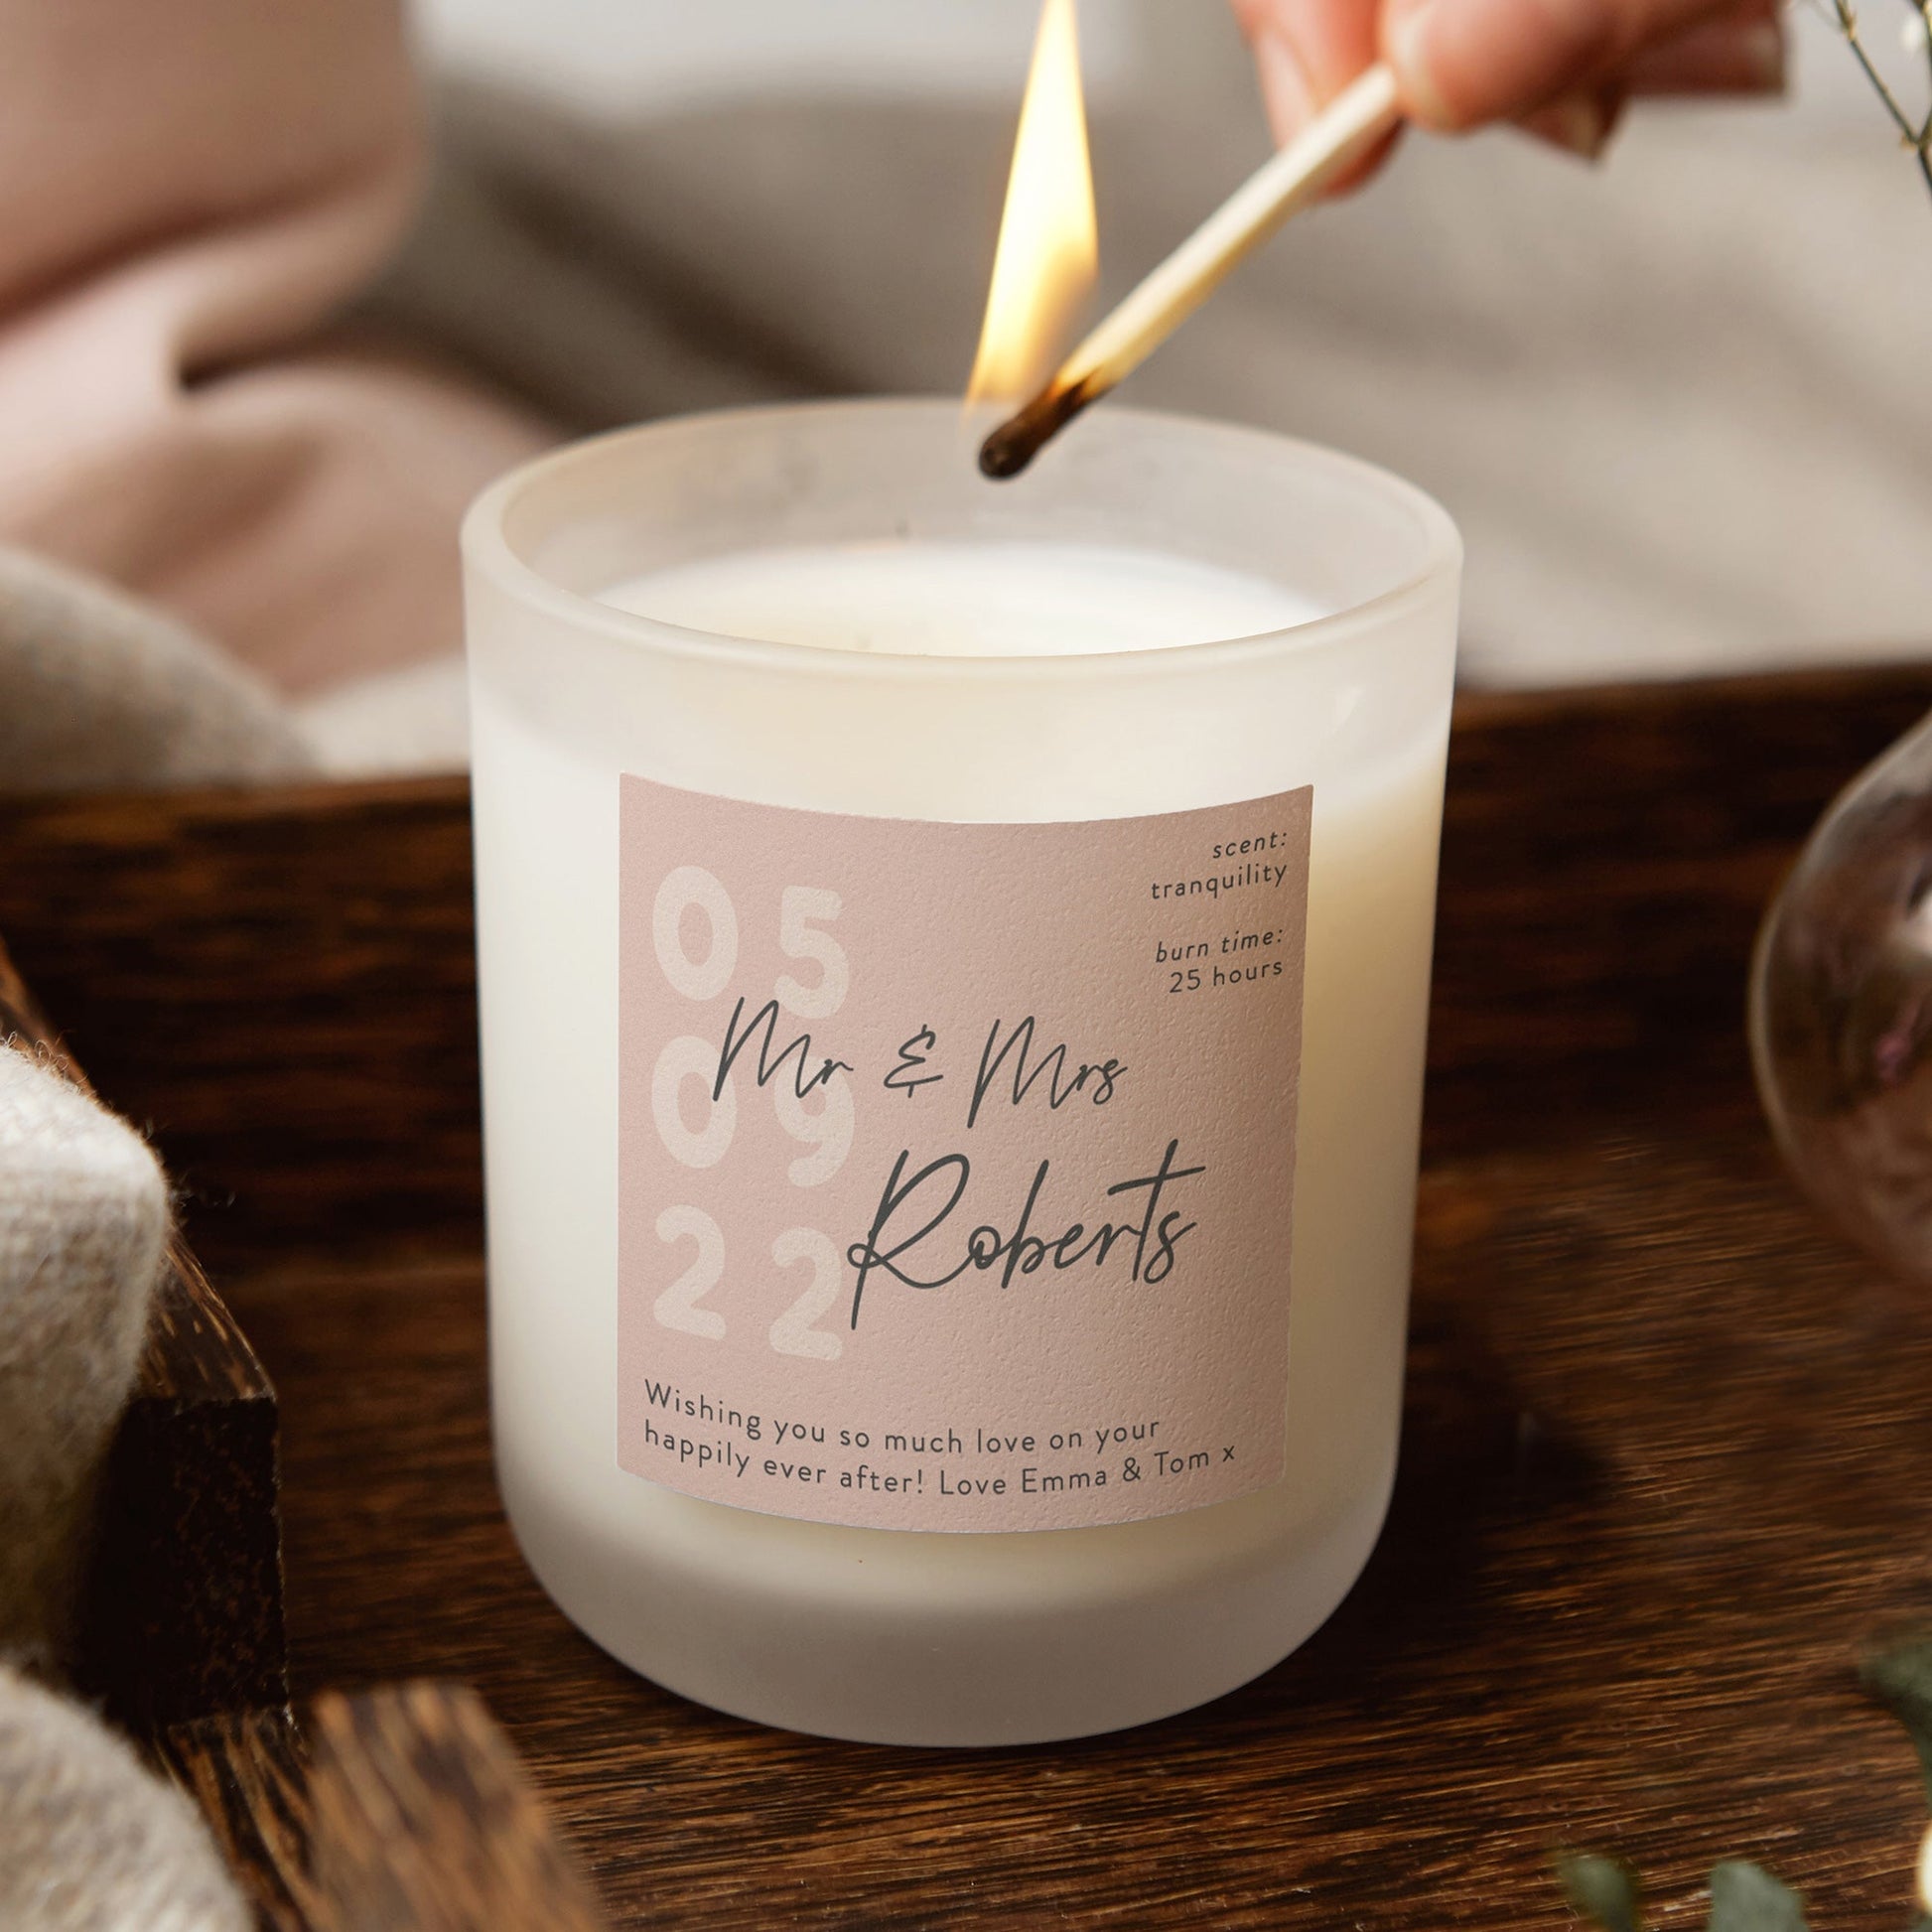 Wedding Gift Personalised Date Candle - Kindred Fires